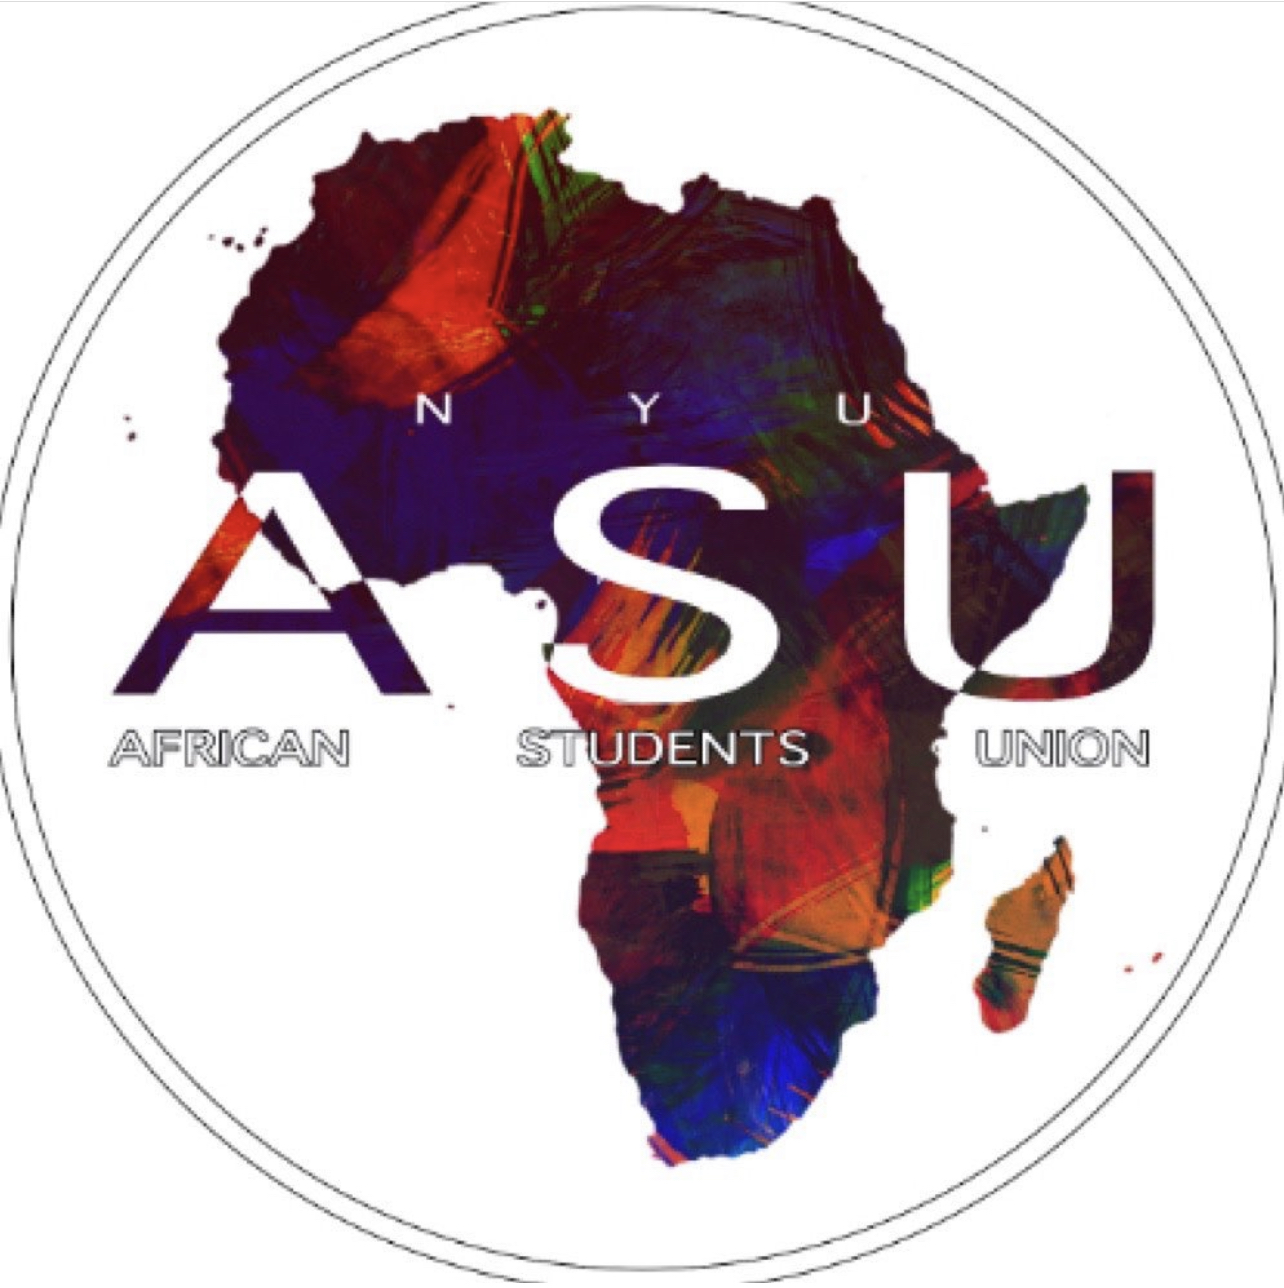 The African Student Union logo: the African continent inside a circle with the words, “NYU ASU, African Students Union.”